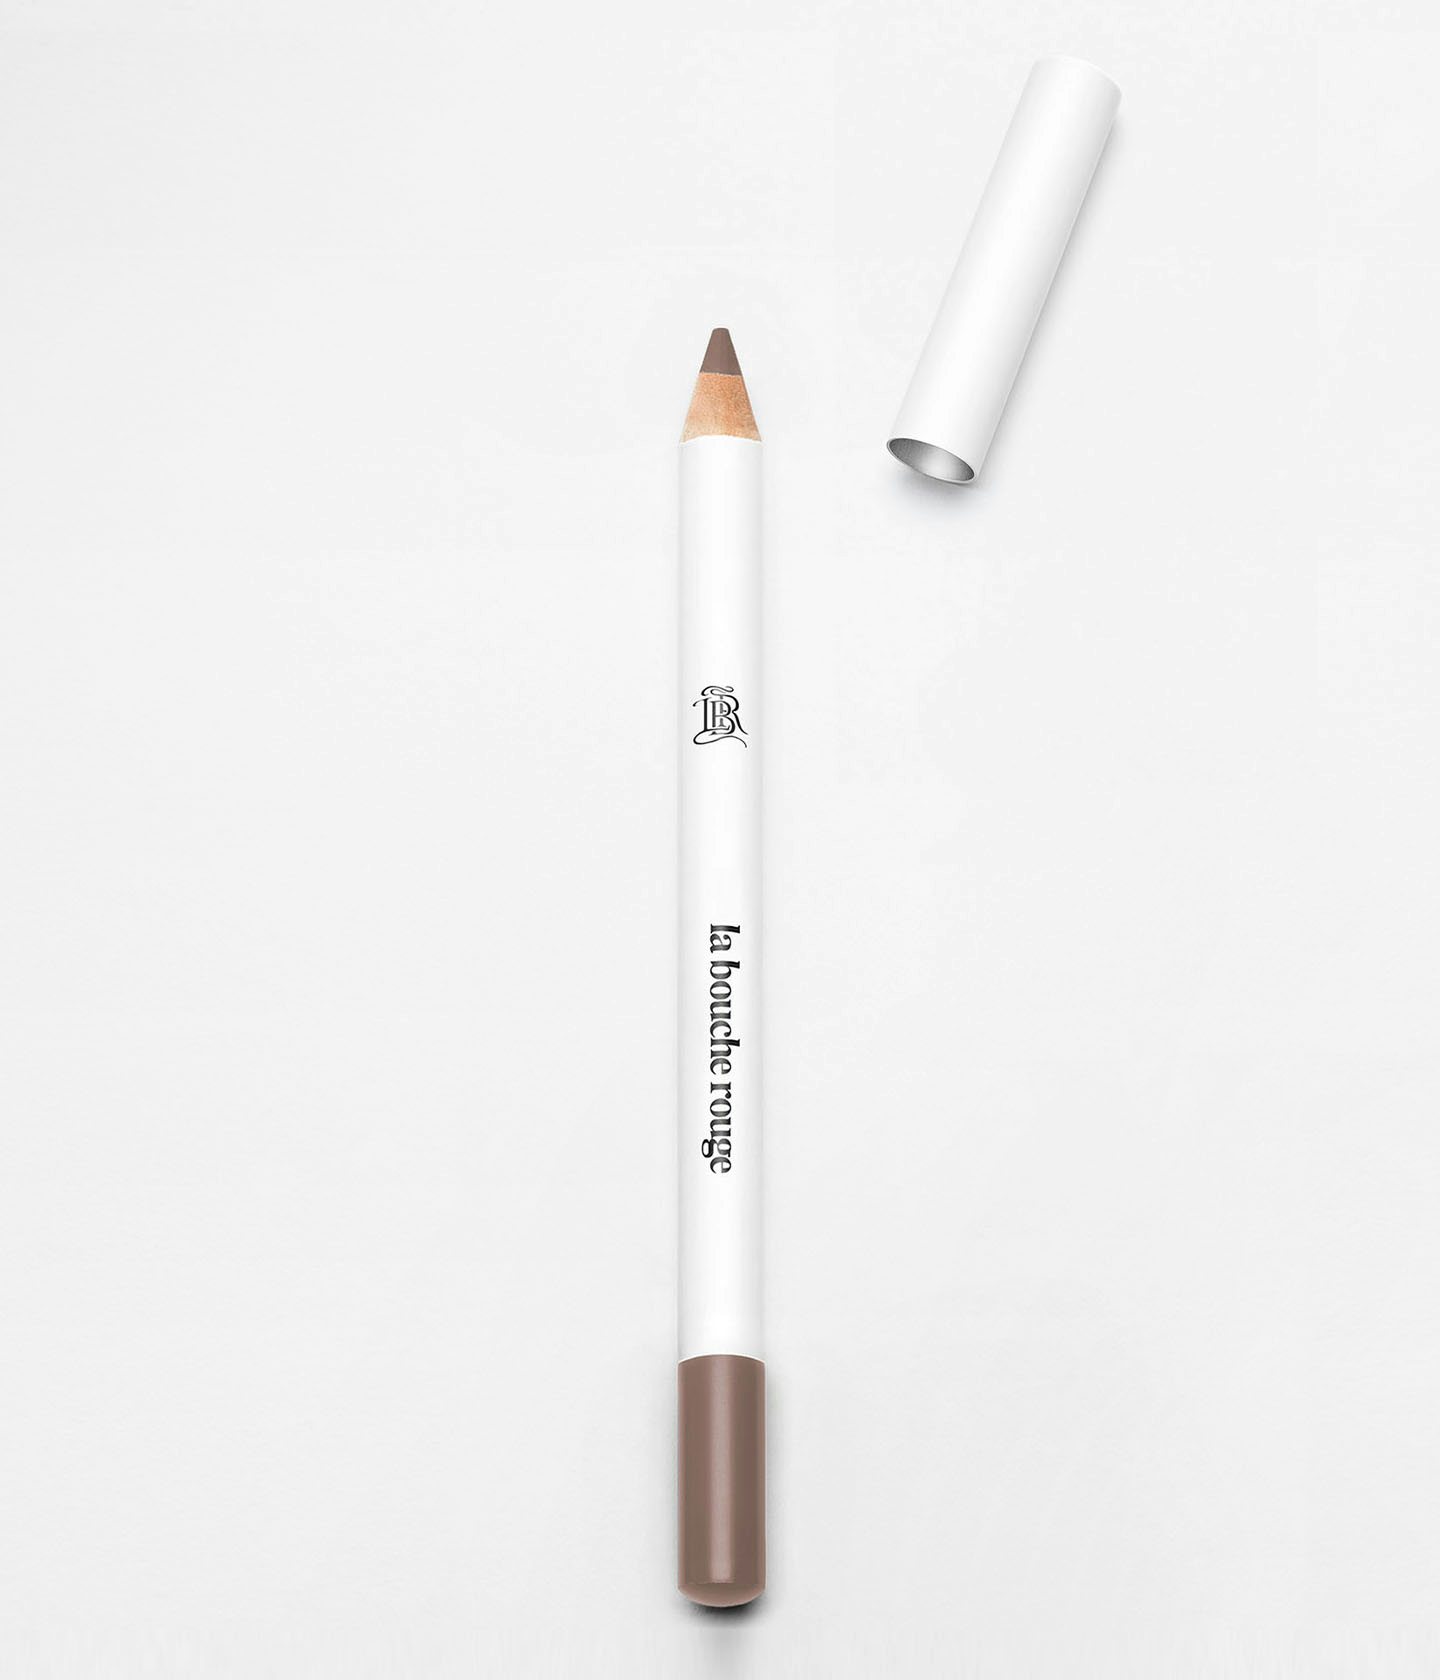 La bouche rouge light brown eyebrow pencil with recyclable metal cap